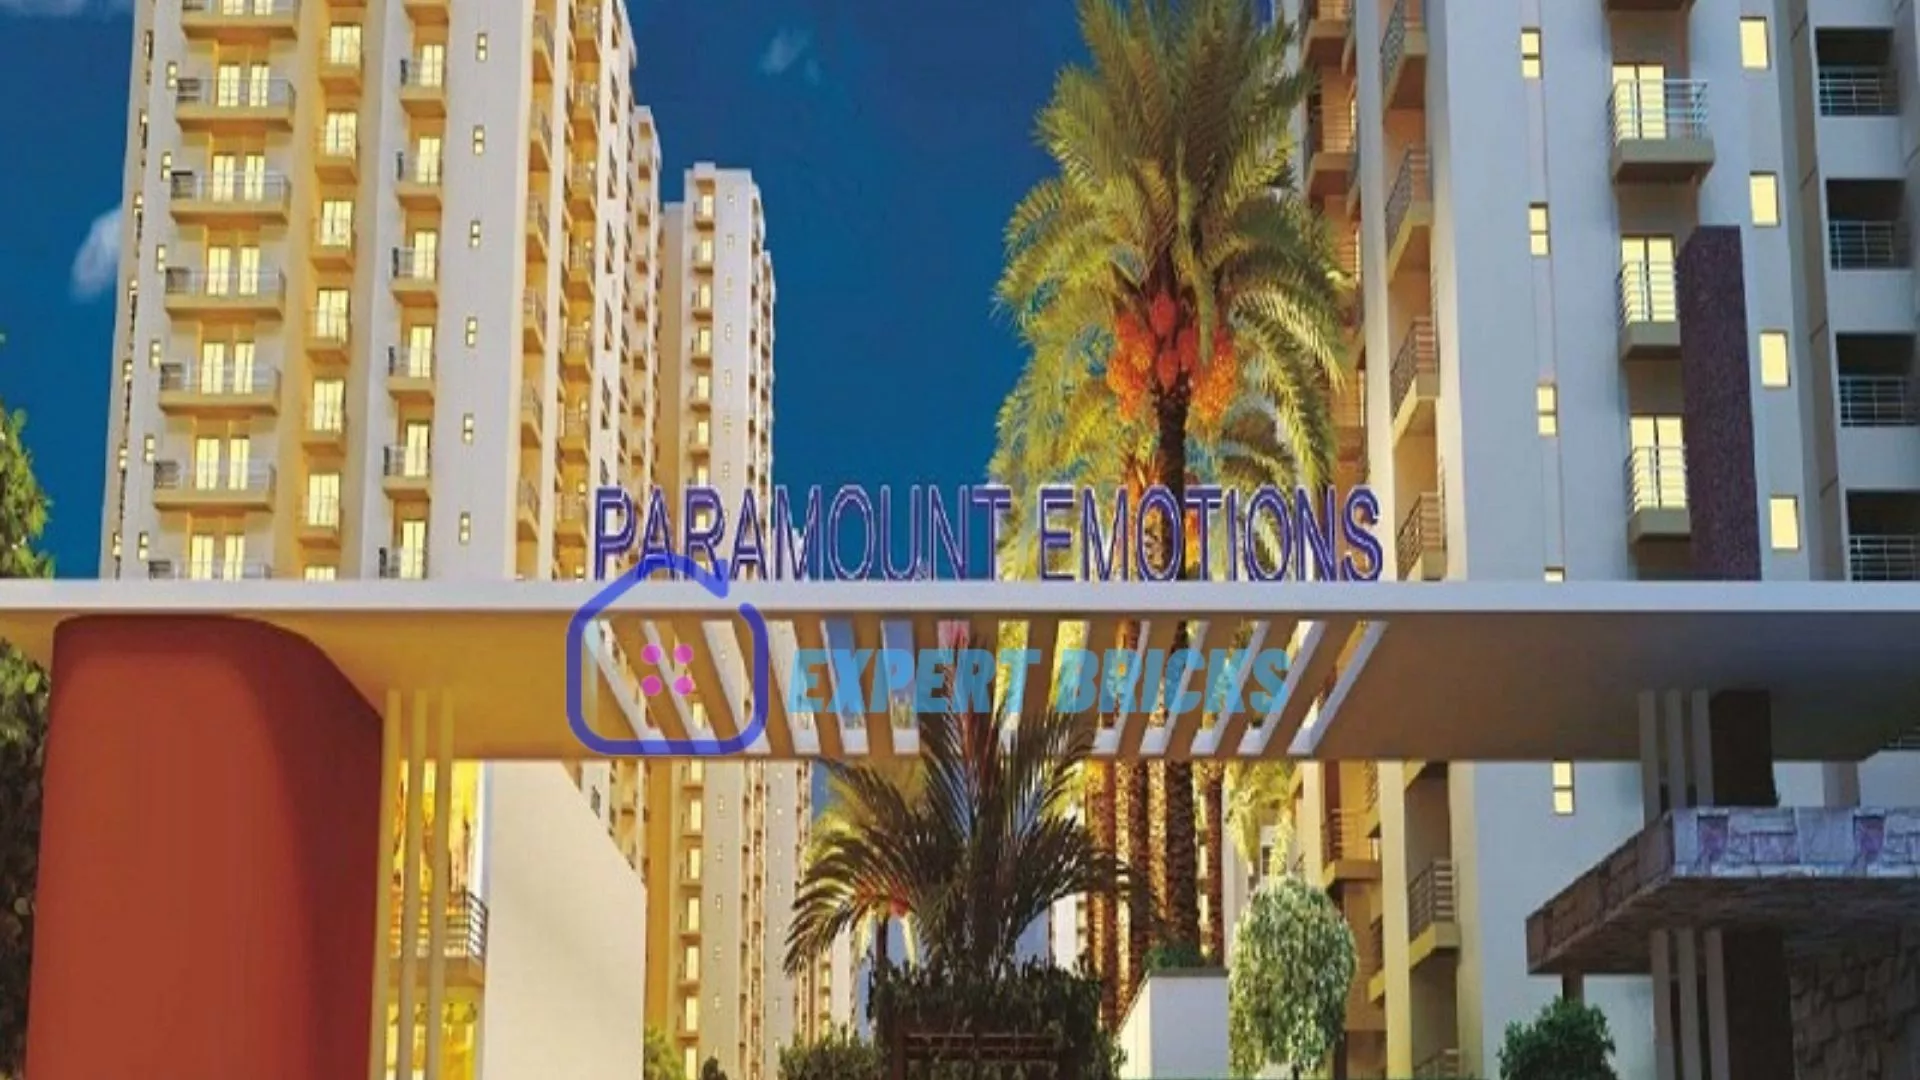 Paramount Emotions in noida extension main gate View